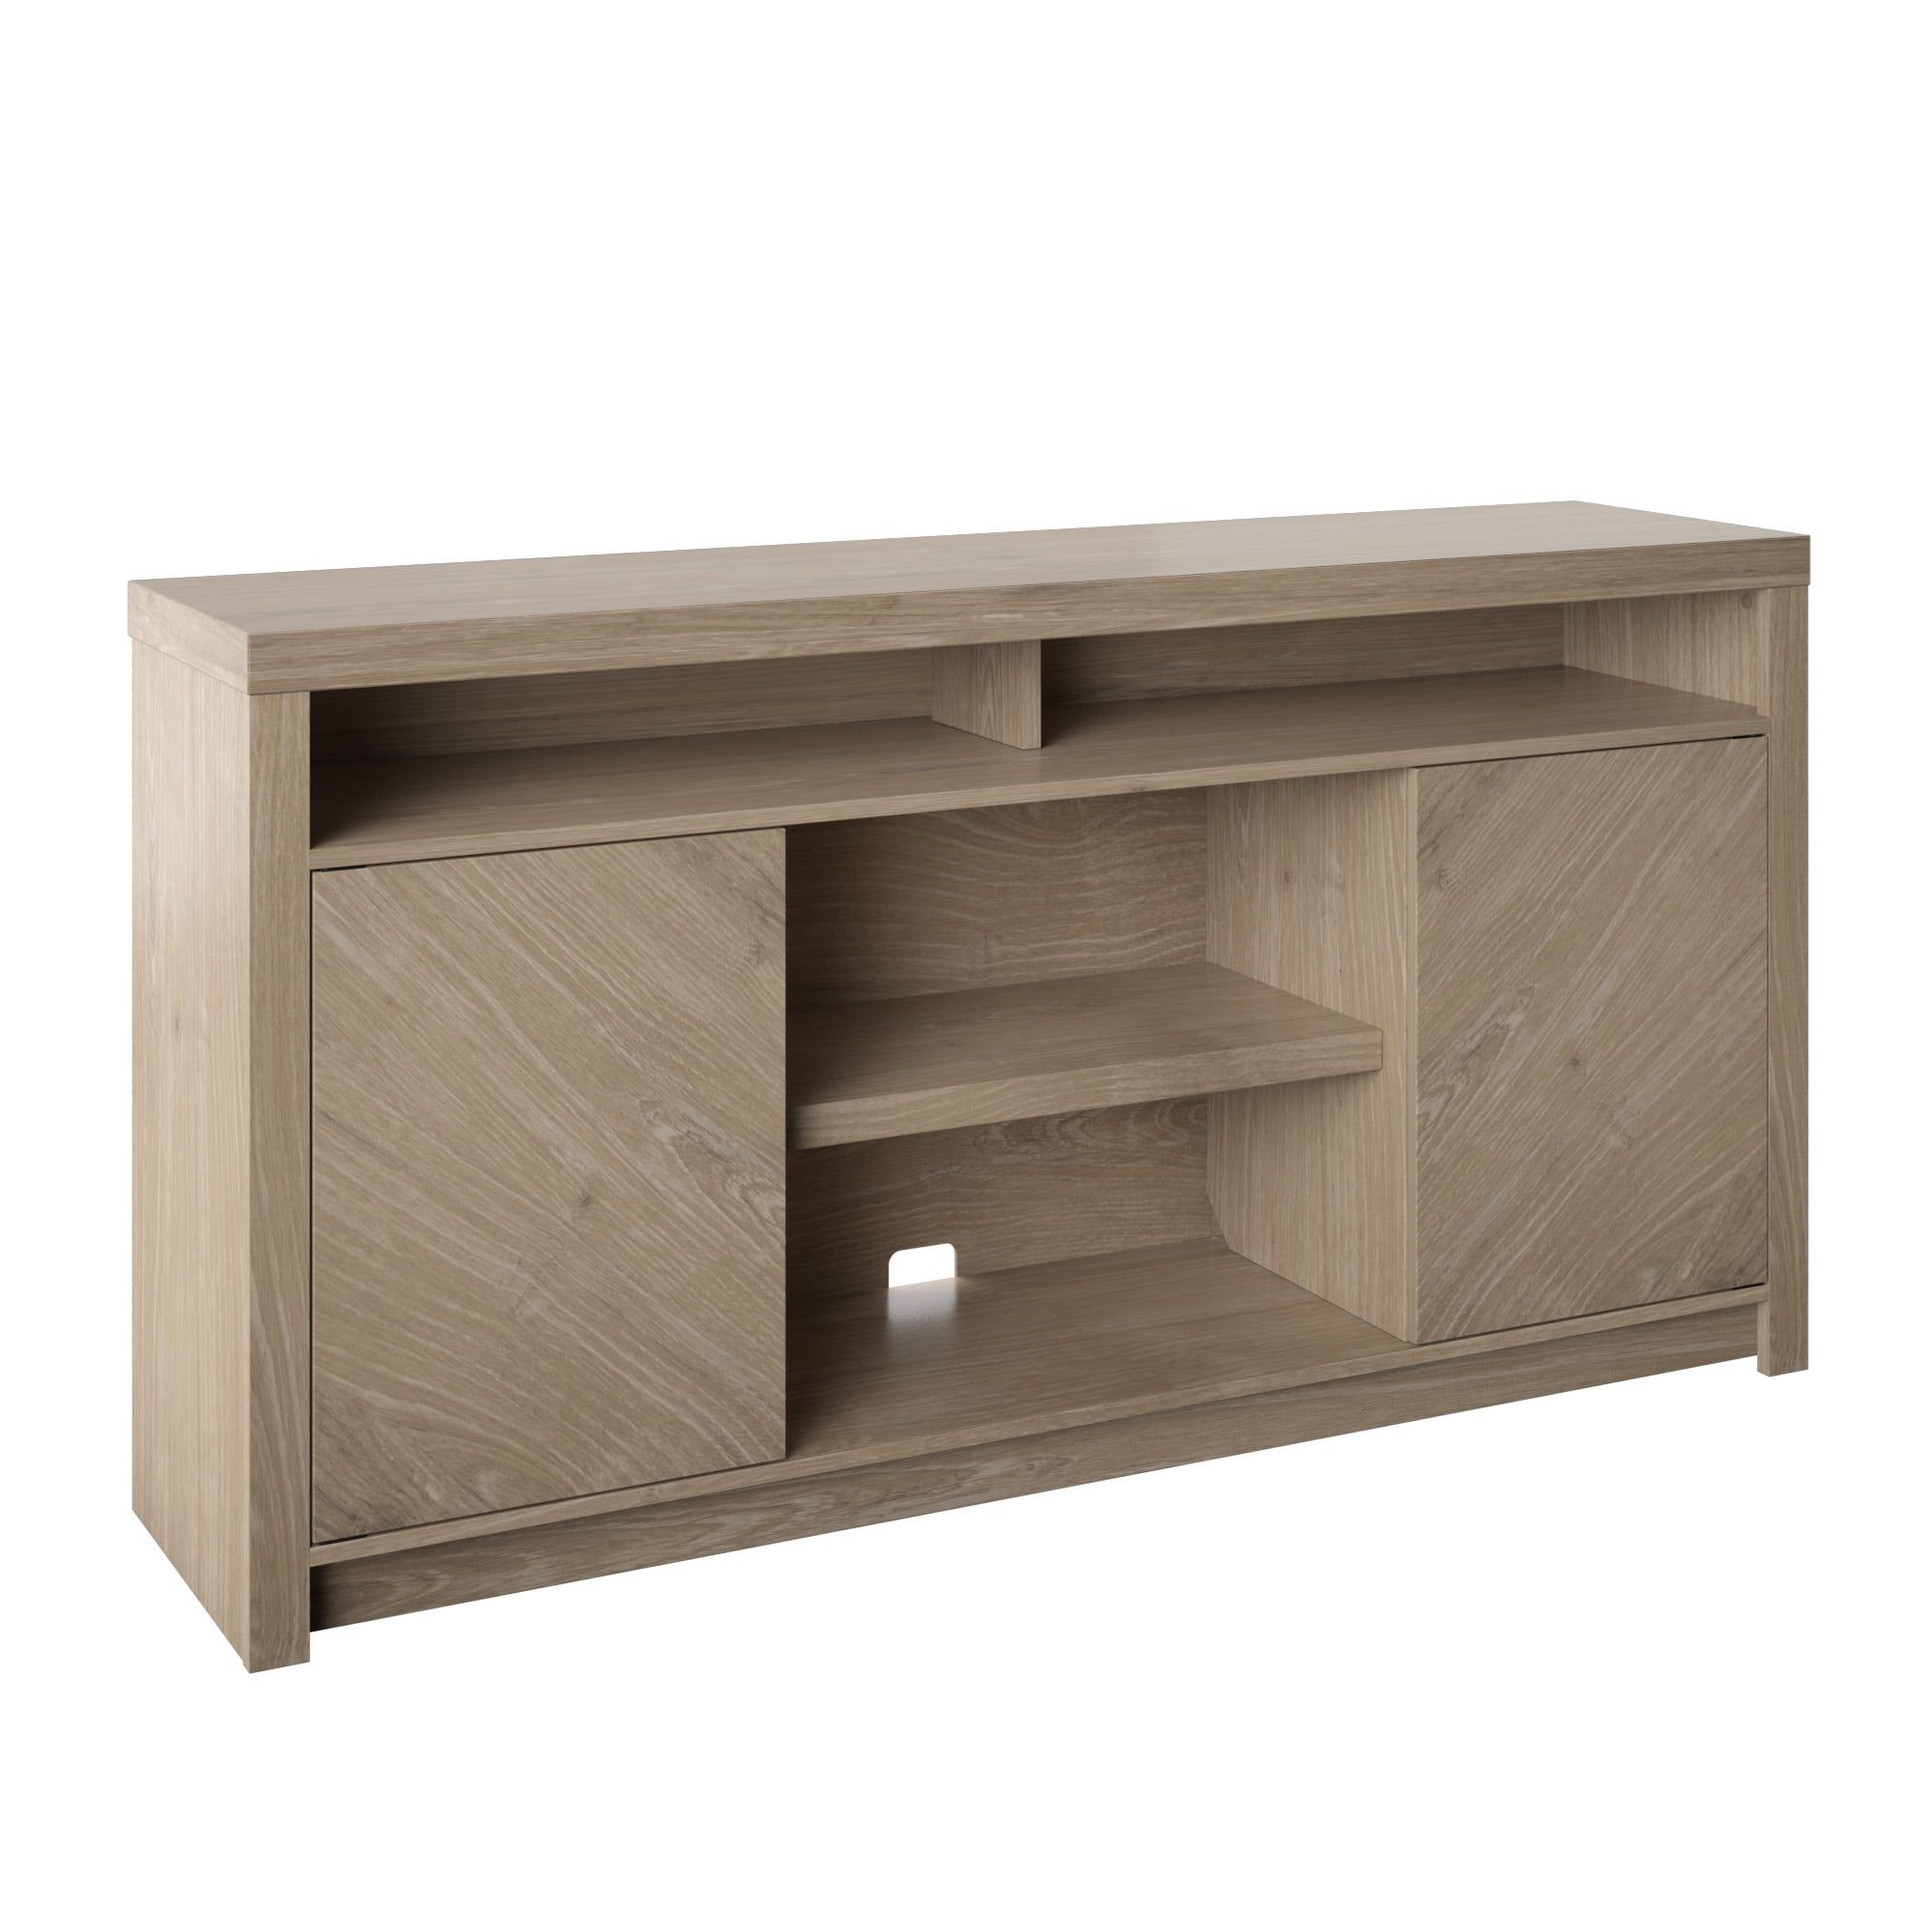 Contemporary Tv Stand For Tvs Up To 70" With Open Center Shelves, Natural  Oak – Walmart Within Cafe Tv Stands With Storage (View 14 of 15)